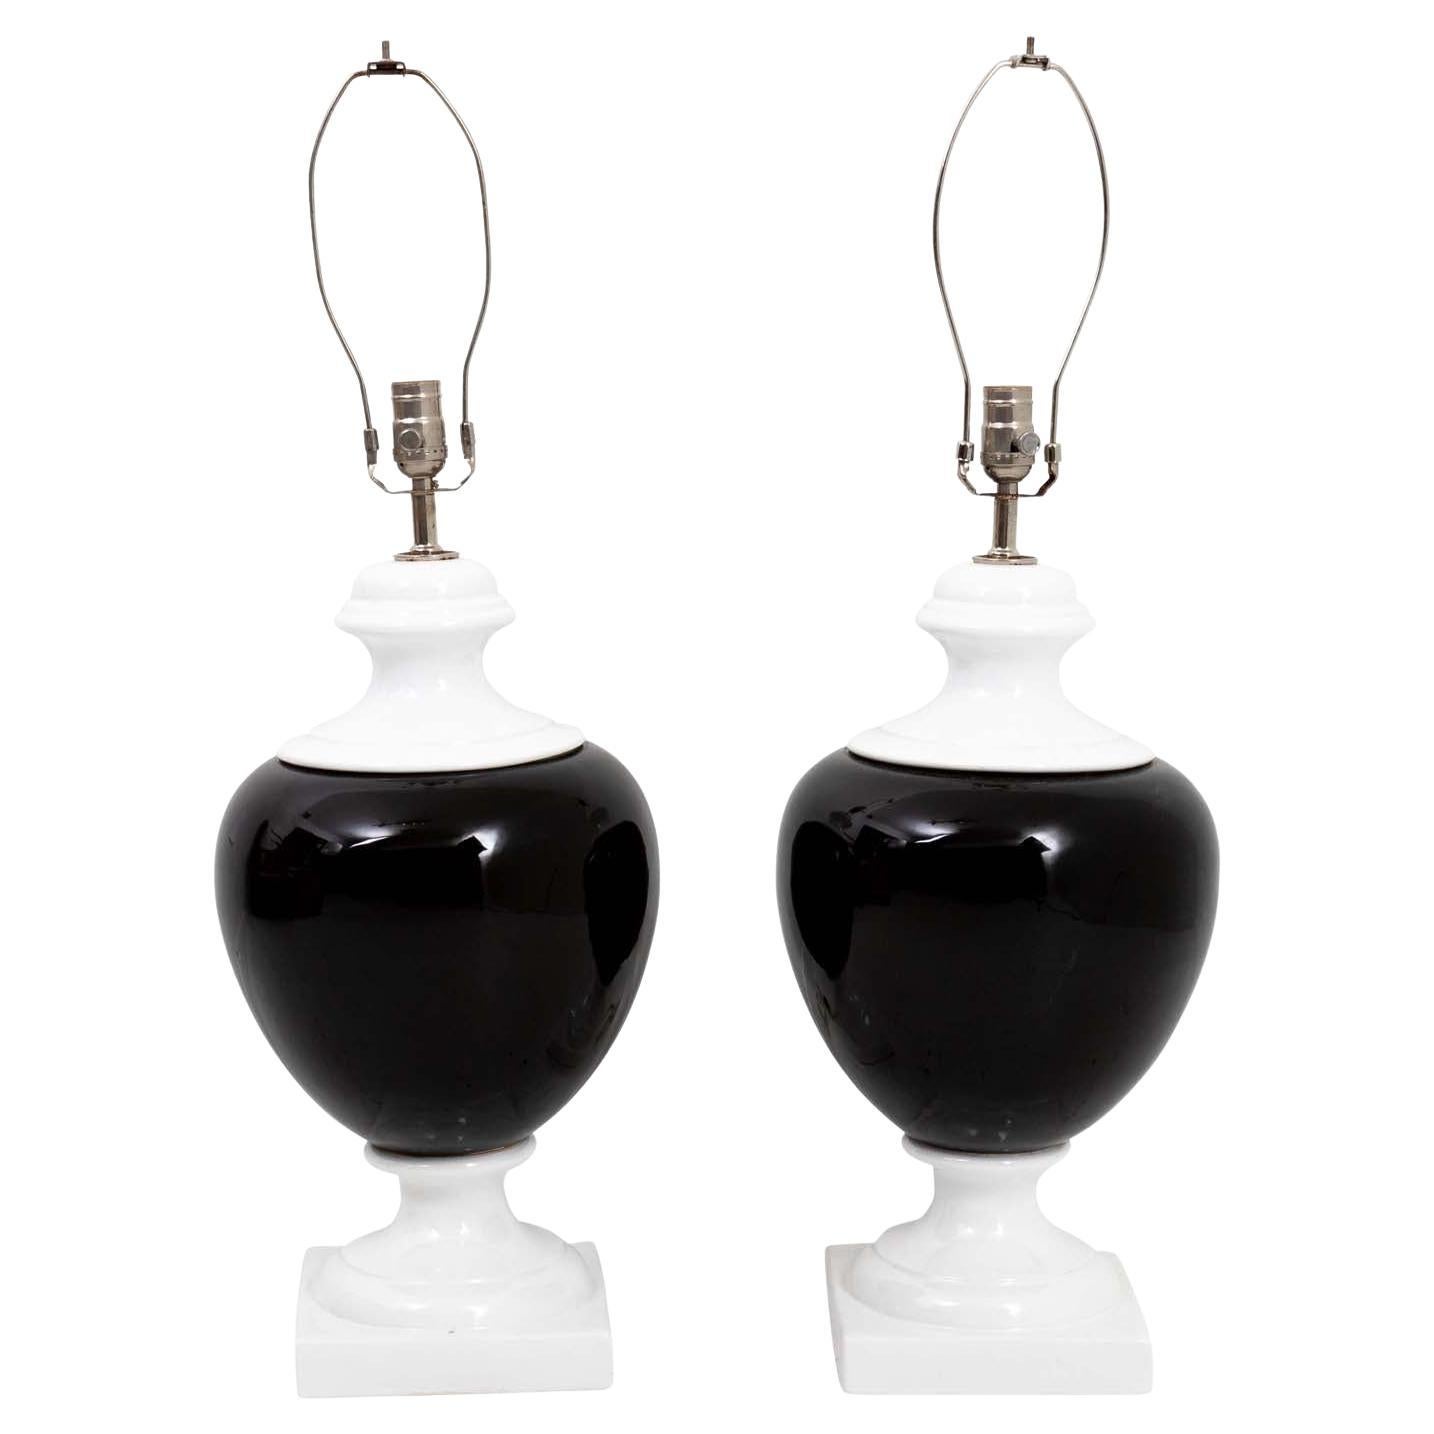 Pair of Black and White Urn Lamps